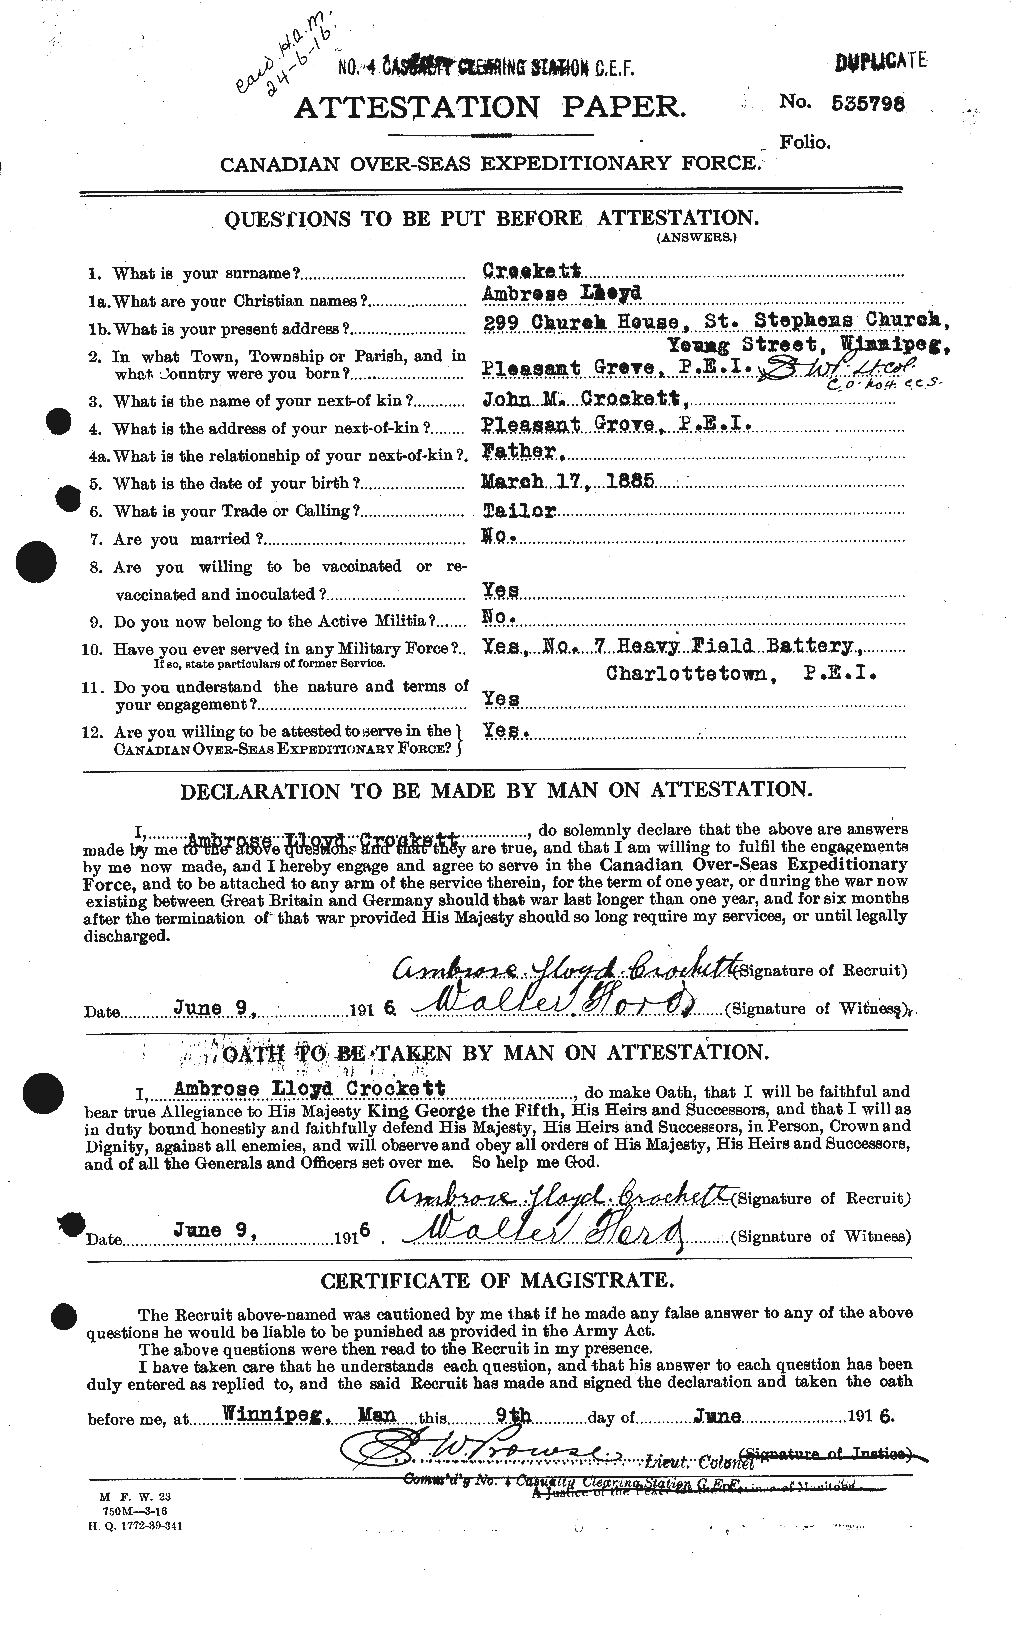 Personnel Records of the First World War - CEF 064726a